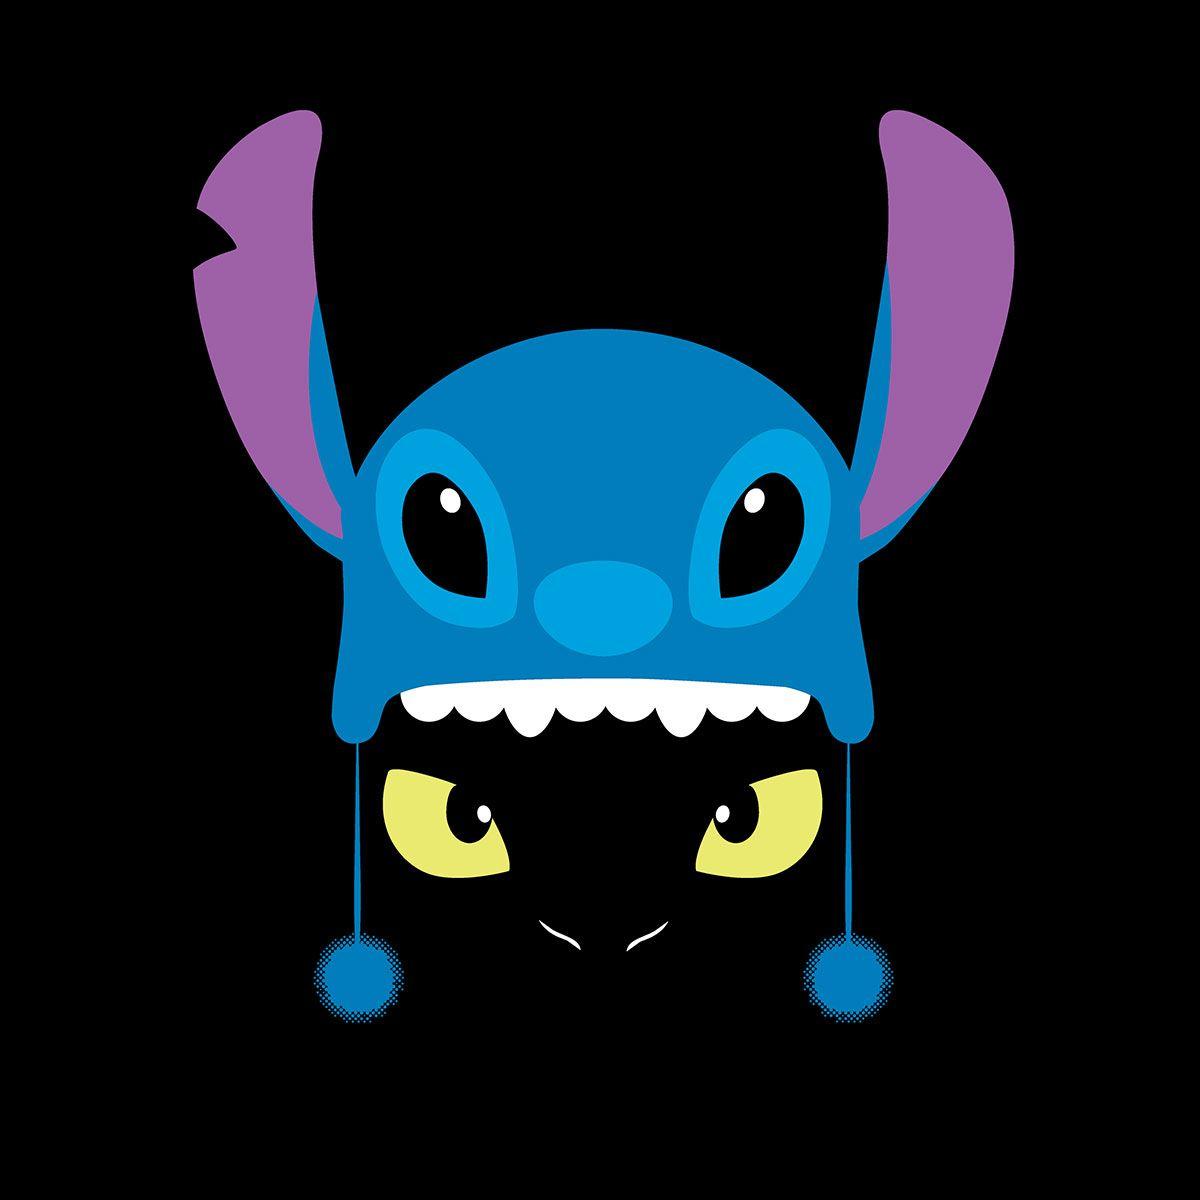 Toothless, Stitch And Pikachu Wallpapers - Wallpaper Cave